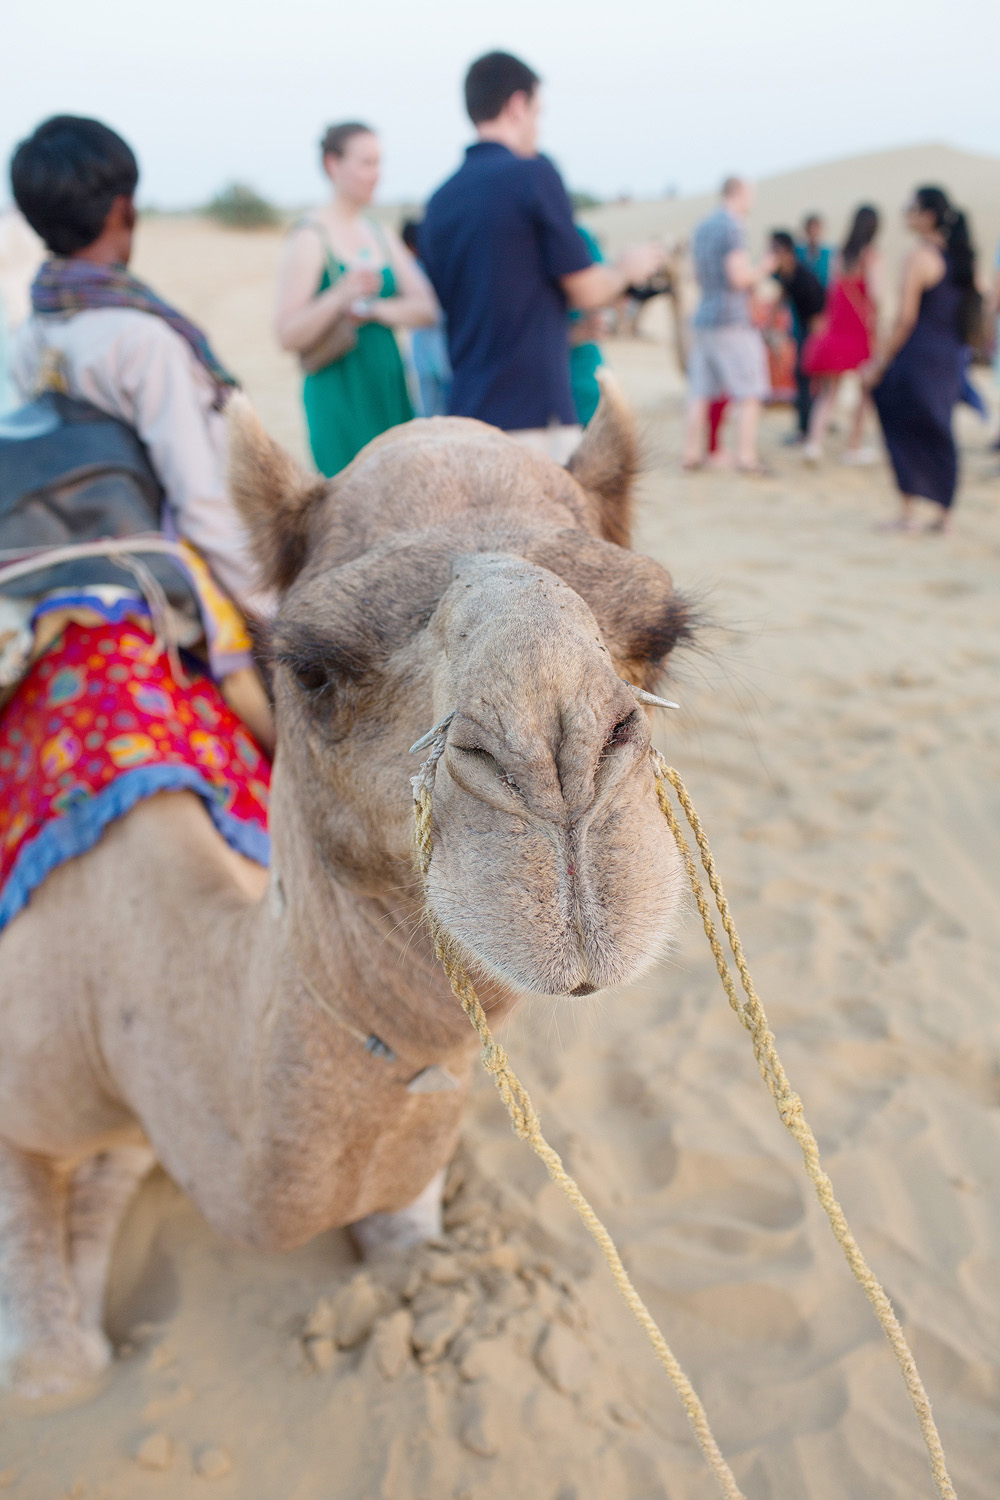 Camel at the Lalhmana Sand Dunes in India